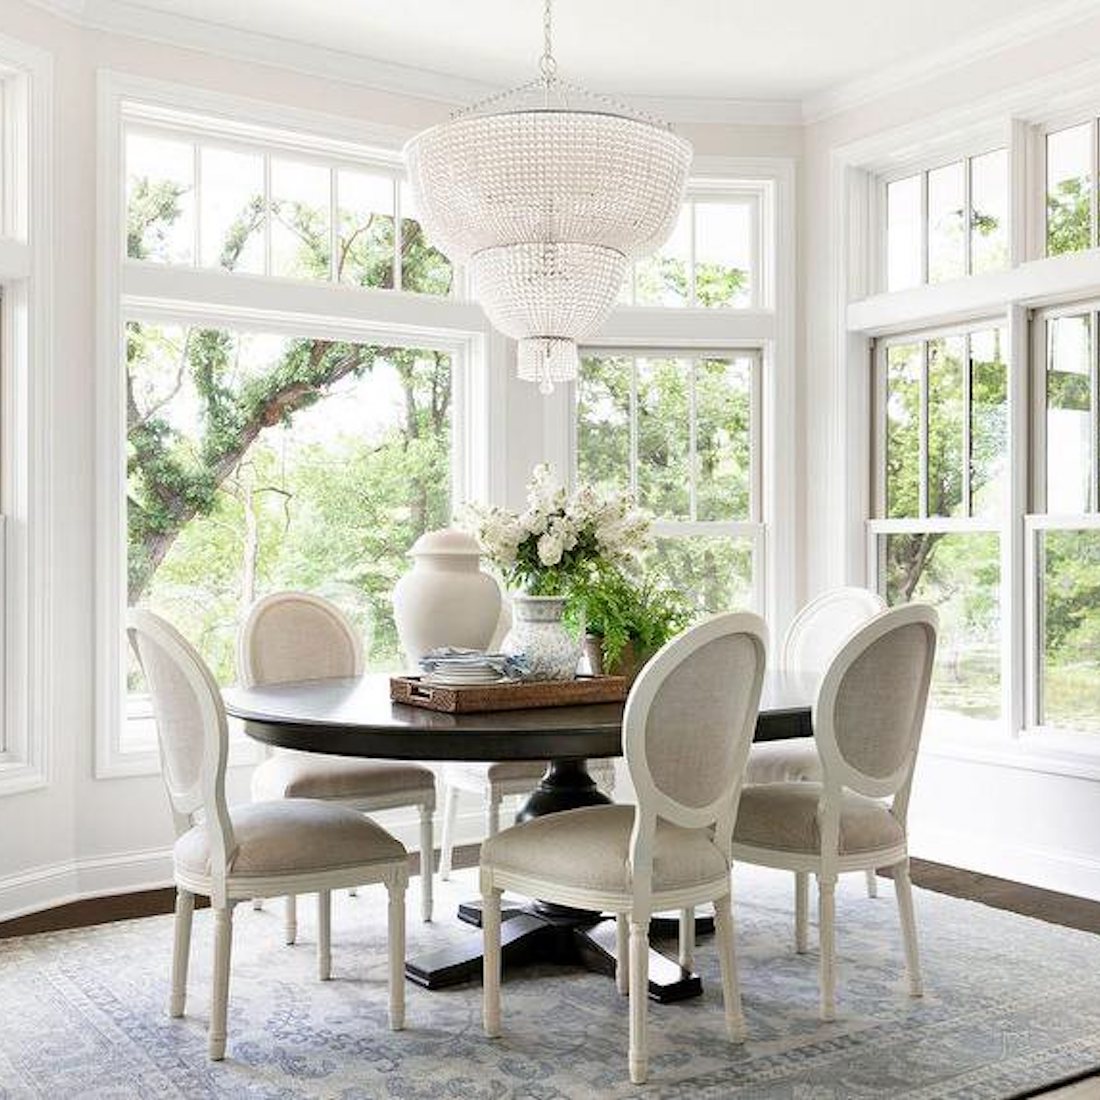 dining room setting with large chandelier overhead